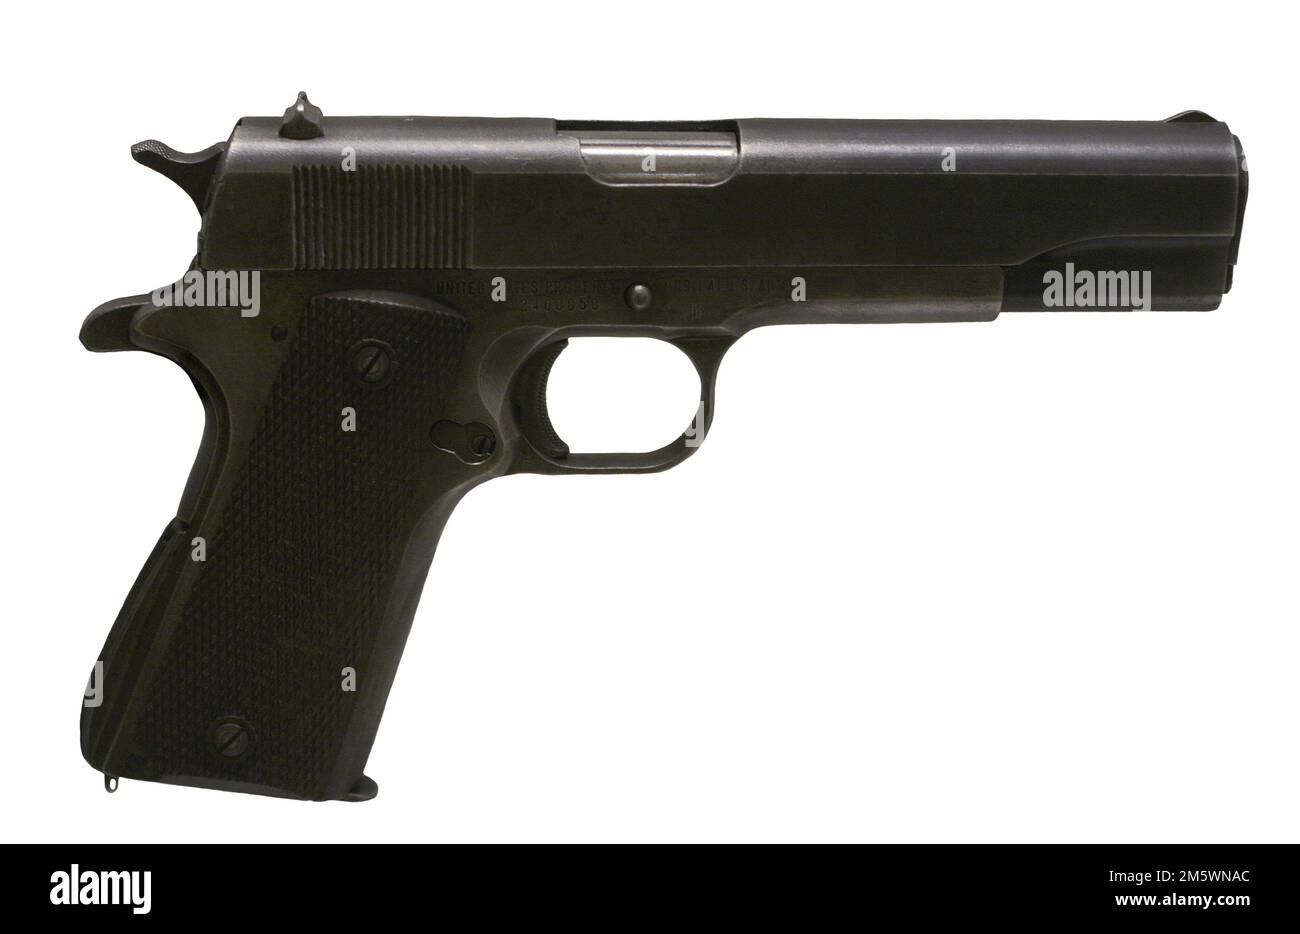 Colt pistol. M1911 A1, 1921. American-made, it was designed by John Moses Browning. Steel, wood and bakelite. Army Museum. Toledo, Spain. Stock Photo